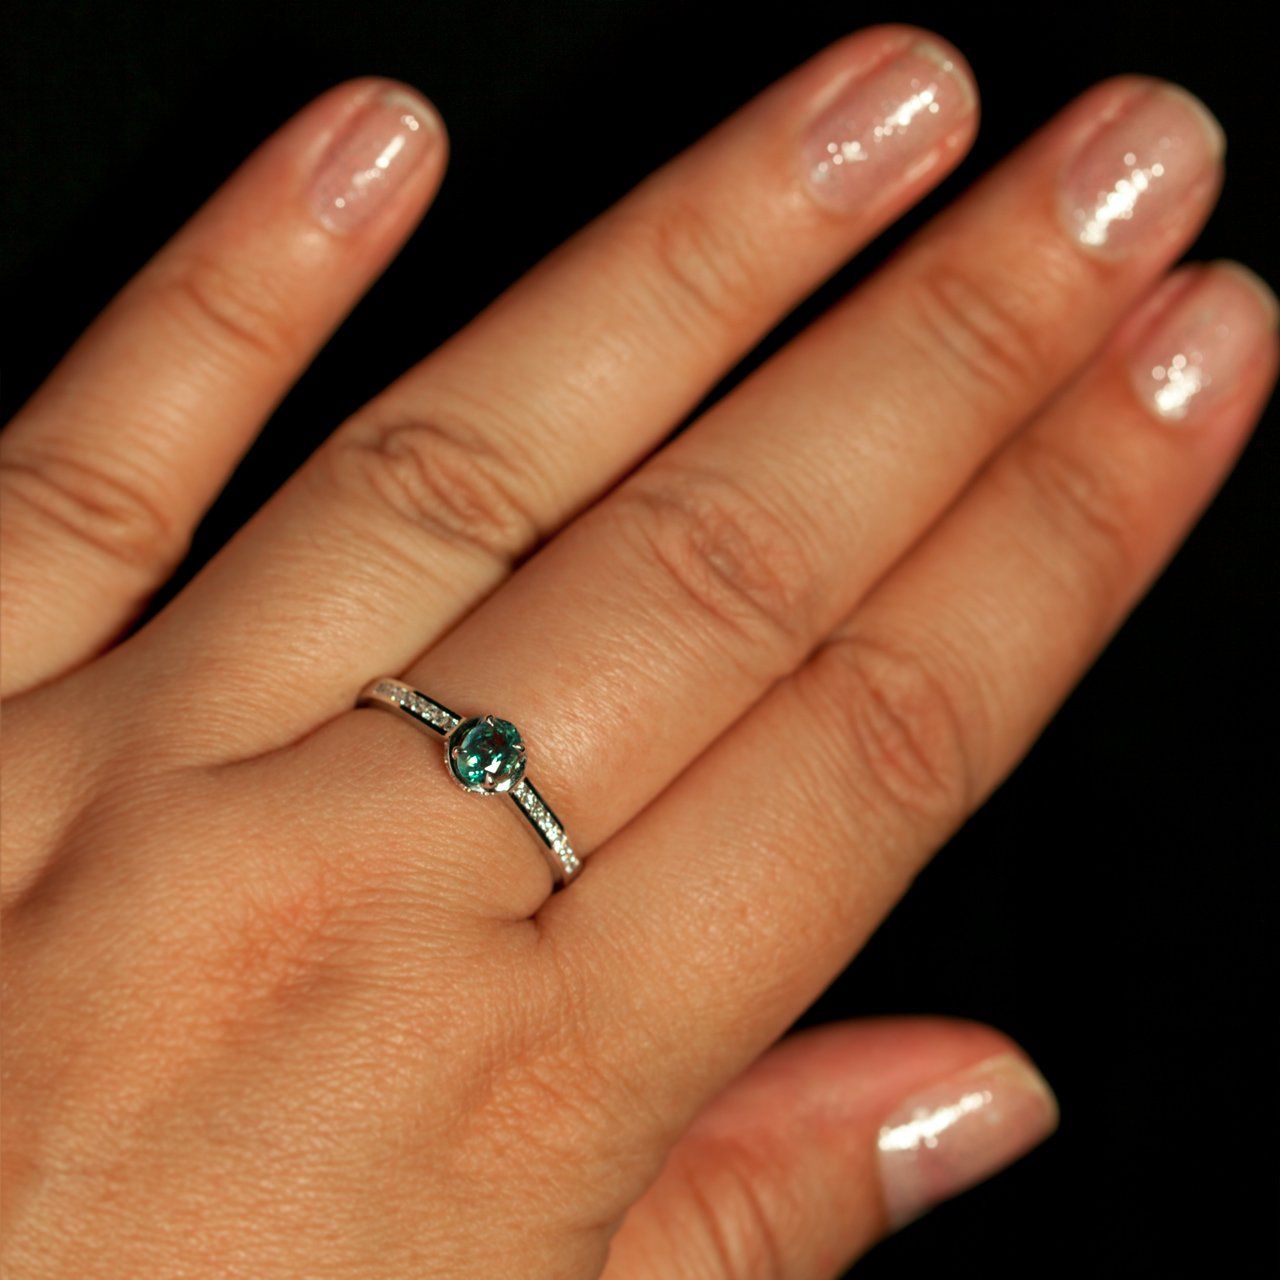 Woman's hand displaying an 18k white gold ring with a 0.55ct alexandrite